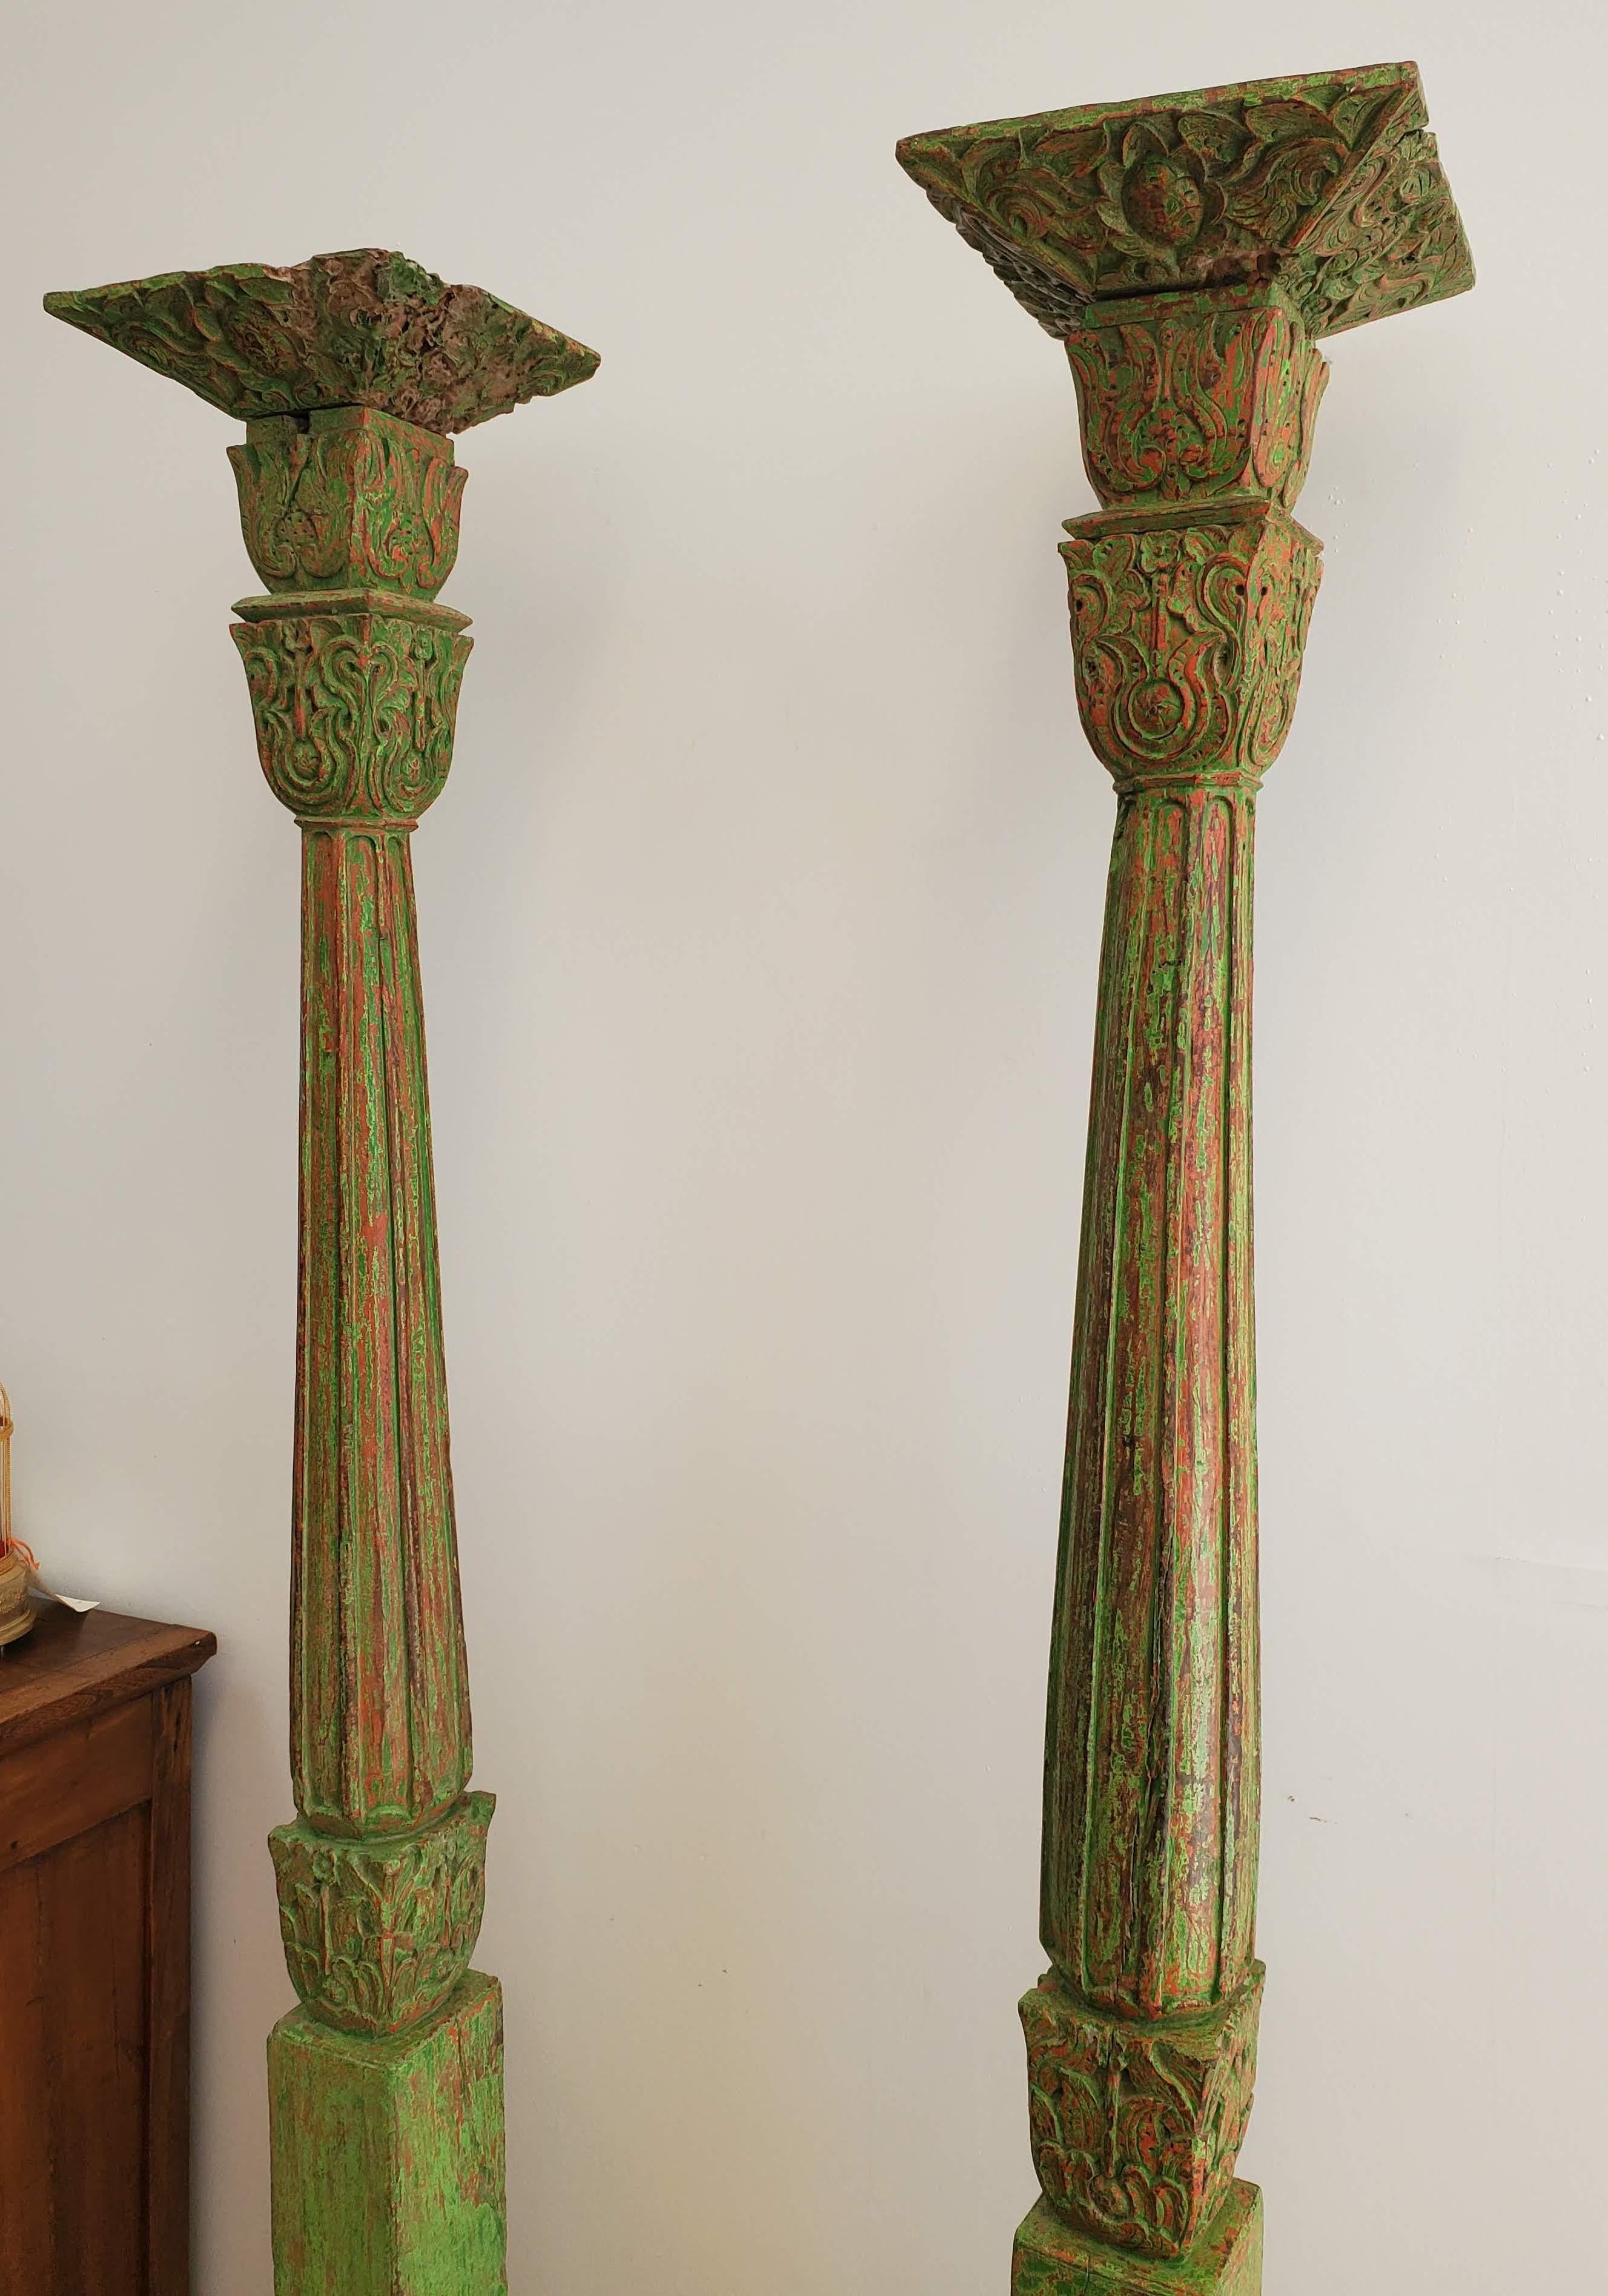 Pair of 19th century Indonesian carved columns. Made of teak with intricate carved decoration retaining the original green and red painted finish. Java, circa 1880.
Measure: 78.5” H Base: 18” W 11” D.